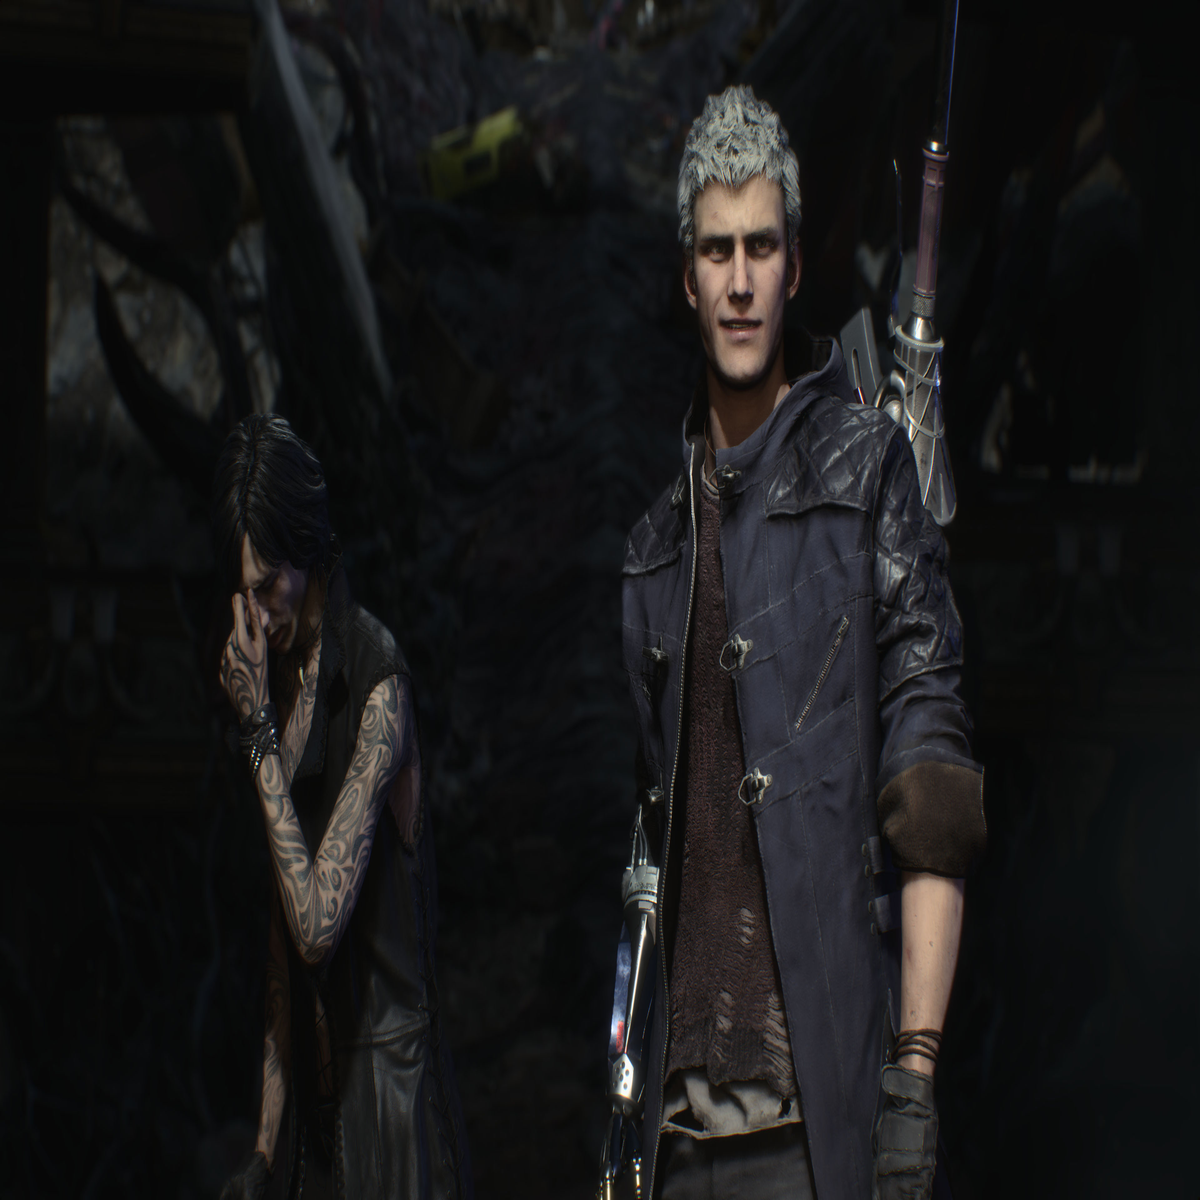 Devil May Cry 5 Review - A Stylish Return To Form - Game Informer